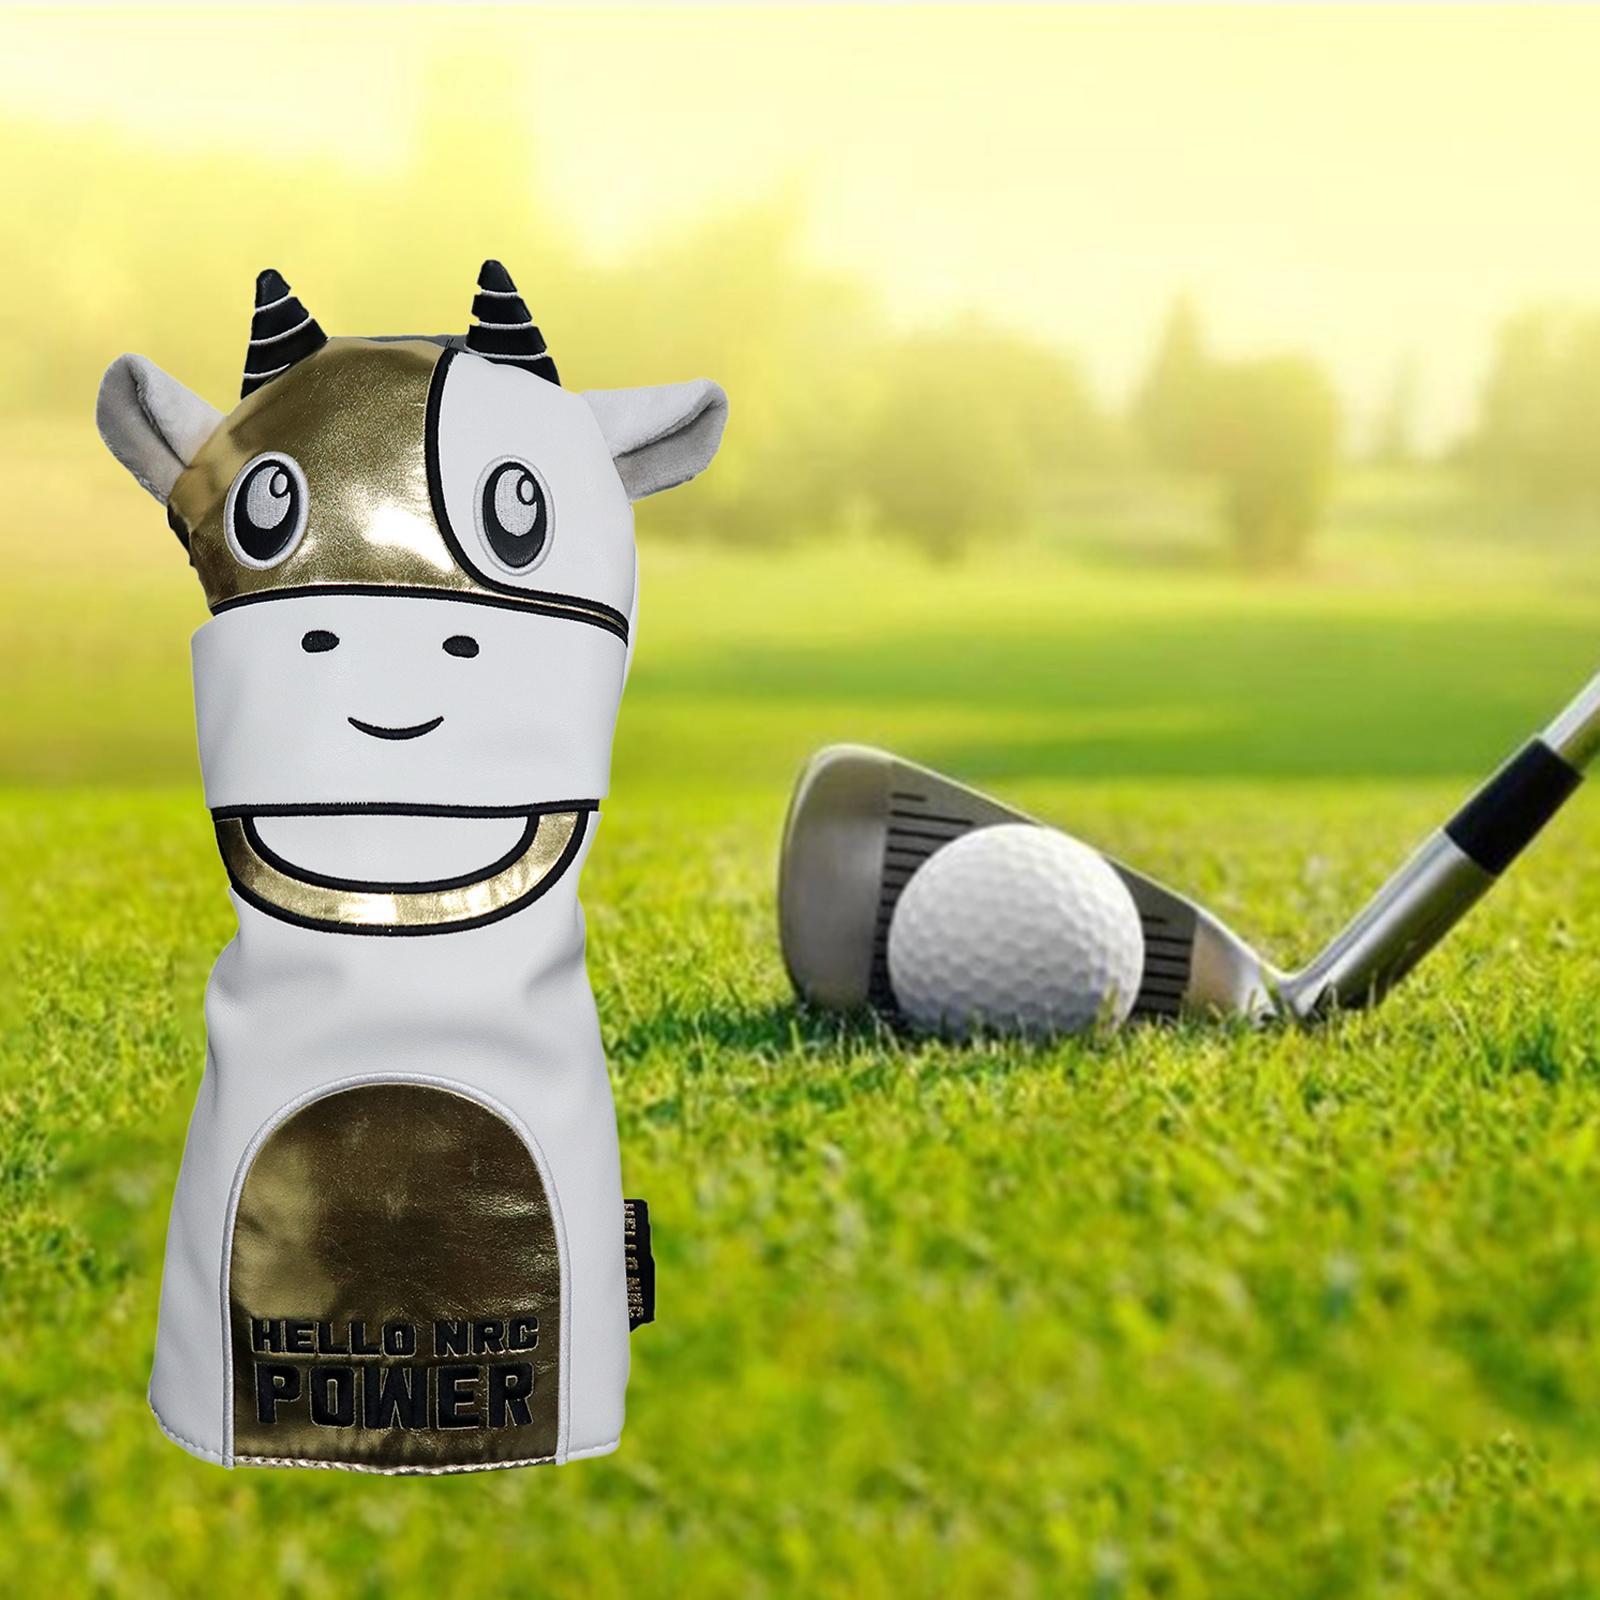 Cow Headcovers Golf Hybrid Driver Covers Water-Proof Headcovers 1 Gold